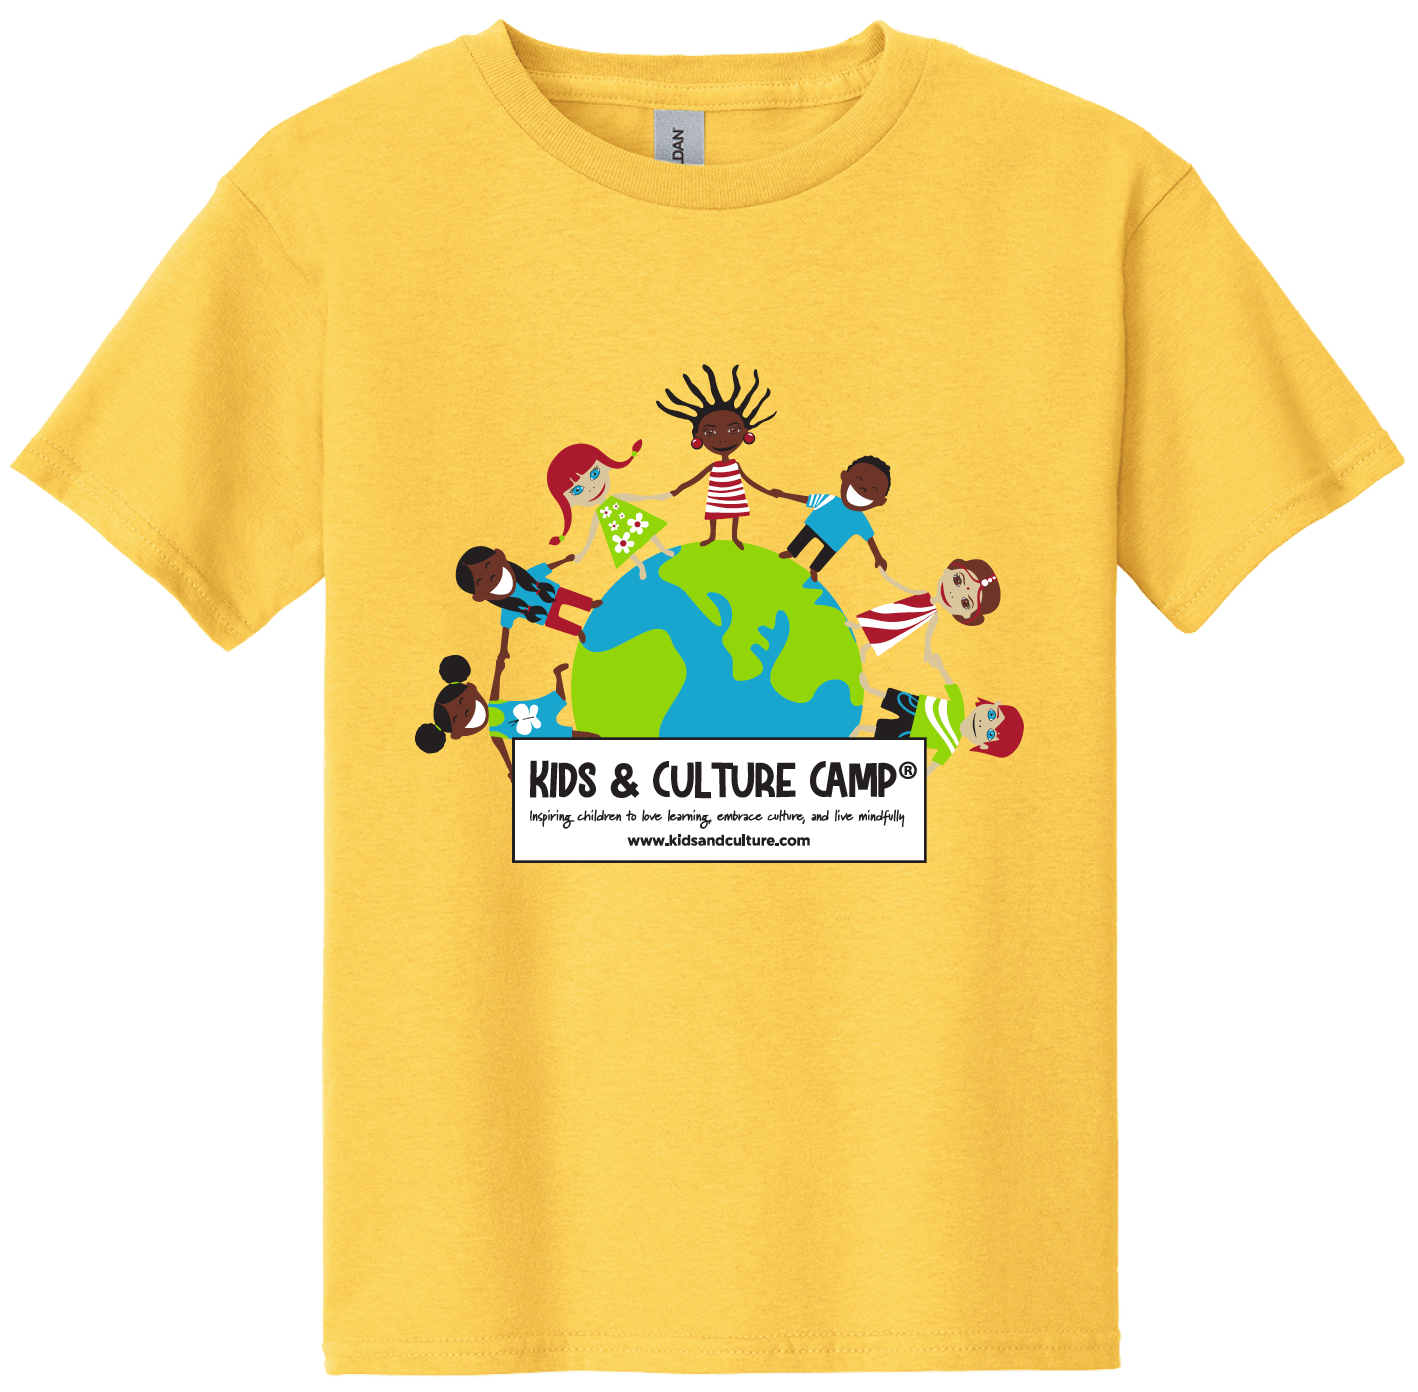 Daisy yellow short sleeved t-shirt with globe logo. Children of different ethnicities are holding hands around the globe. The words Kids & Culture Camp inspiring Children to love learning, embrace culture, and live mindfully are underneath the globe. Kids & Culture Camp's web address is underneath the camp name www.kidsandculture.com.